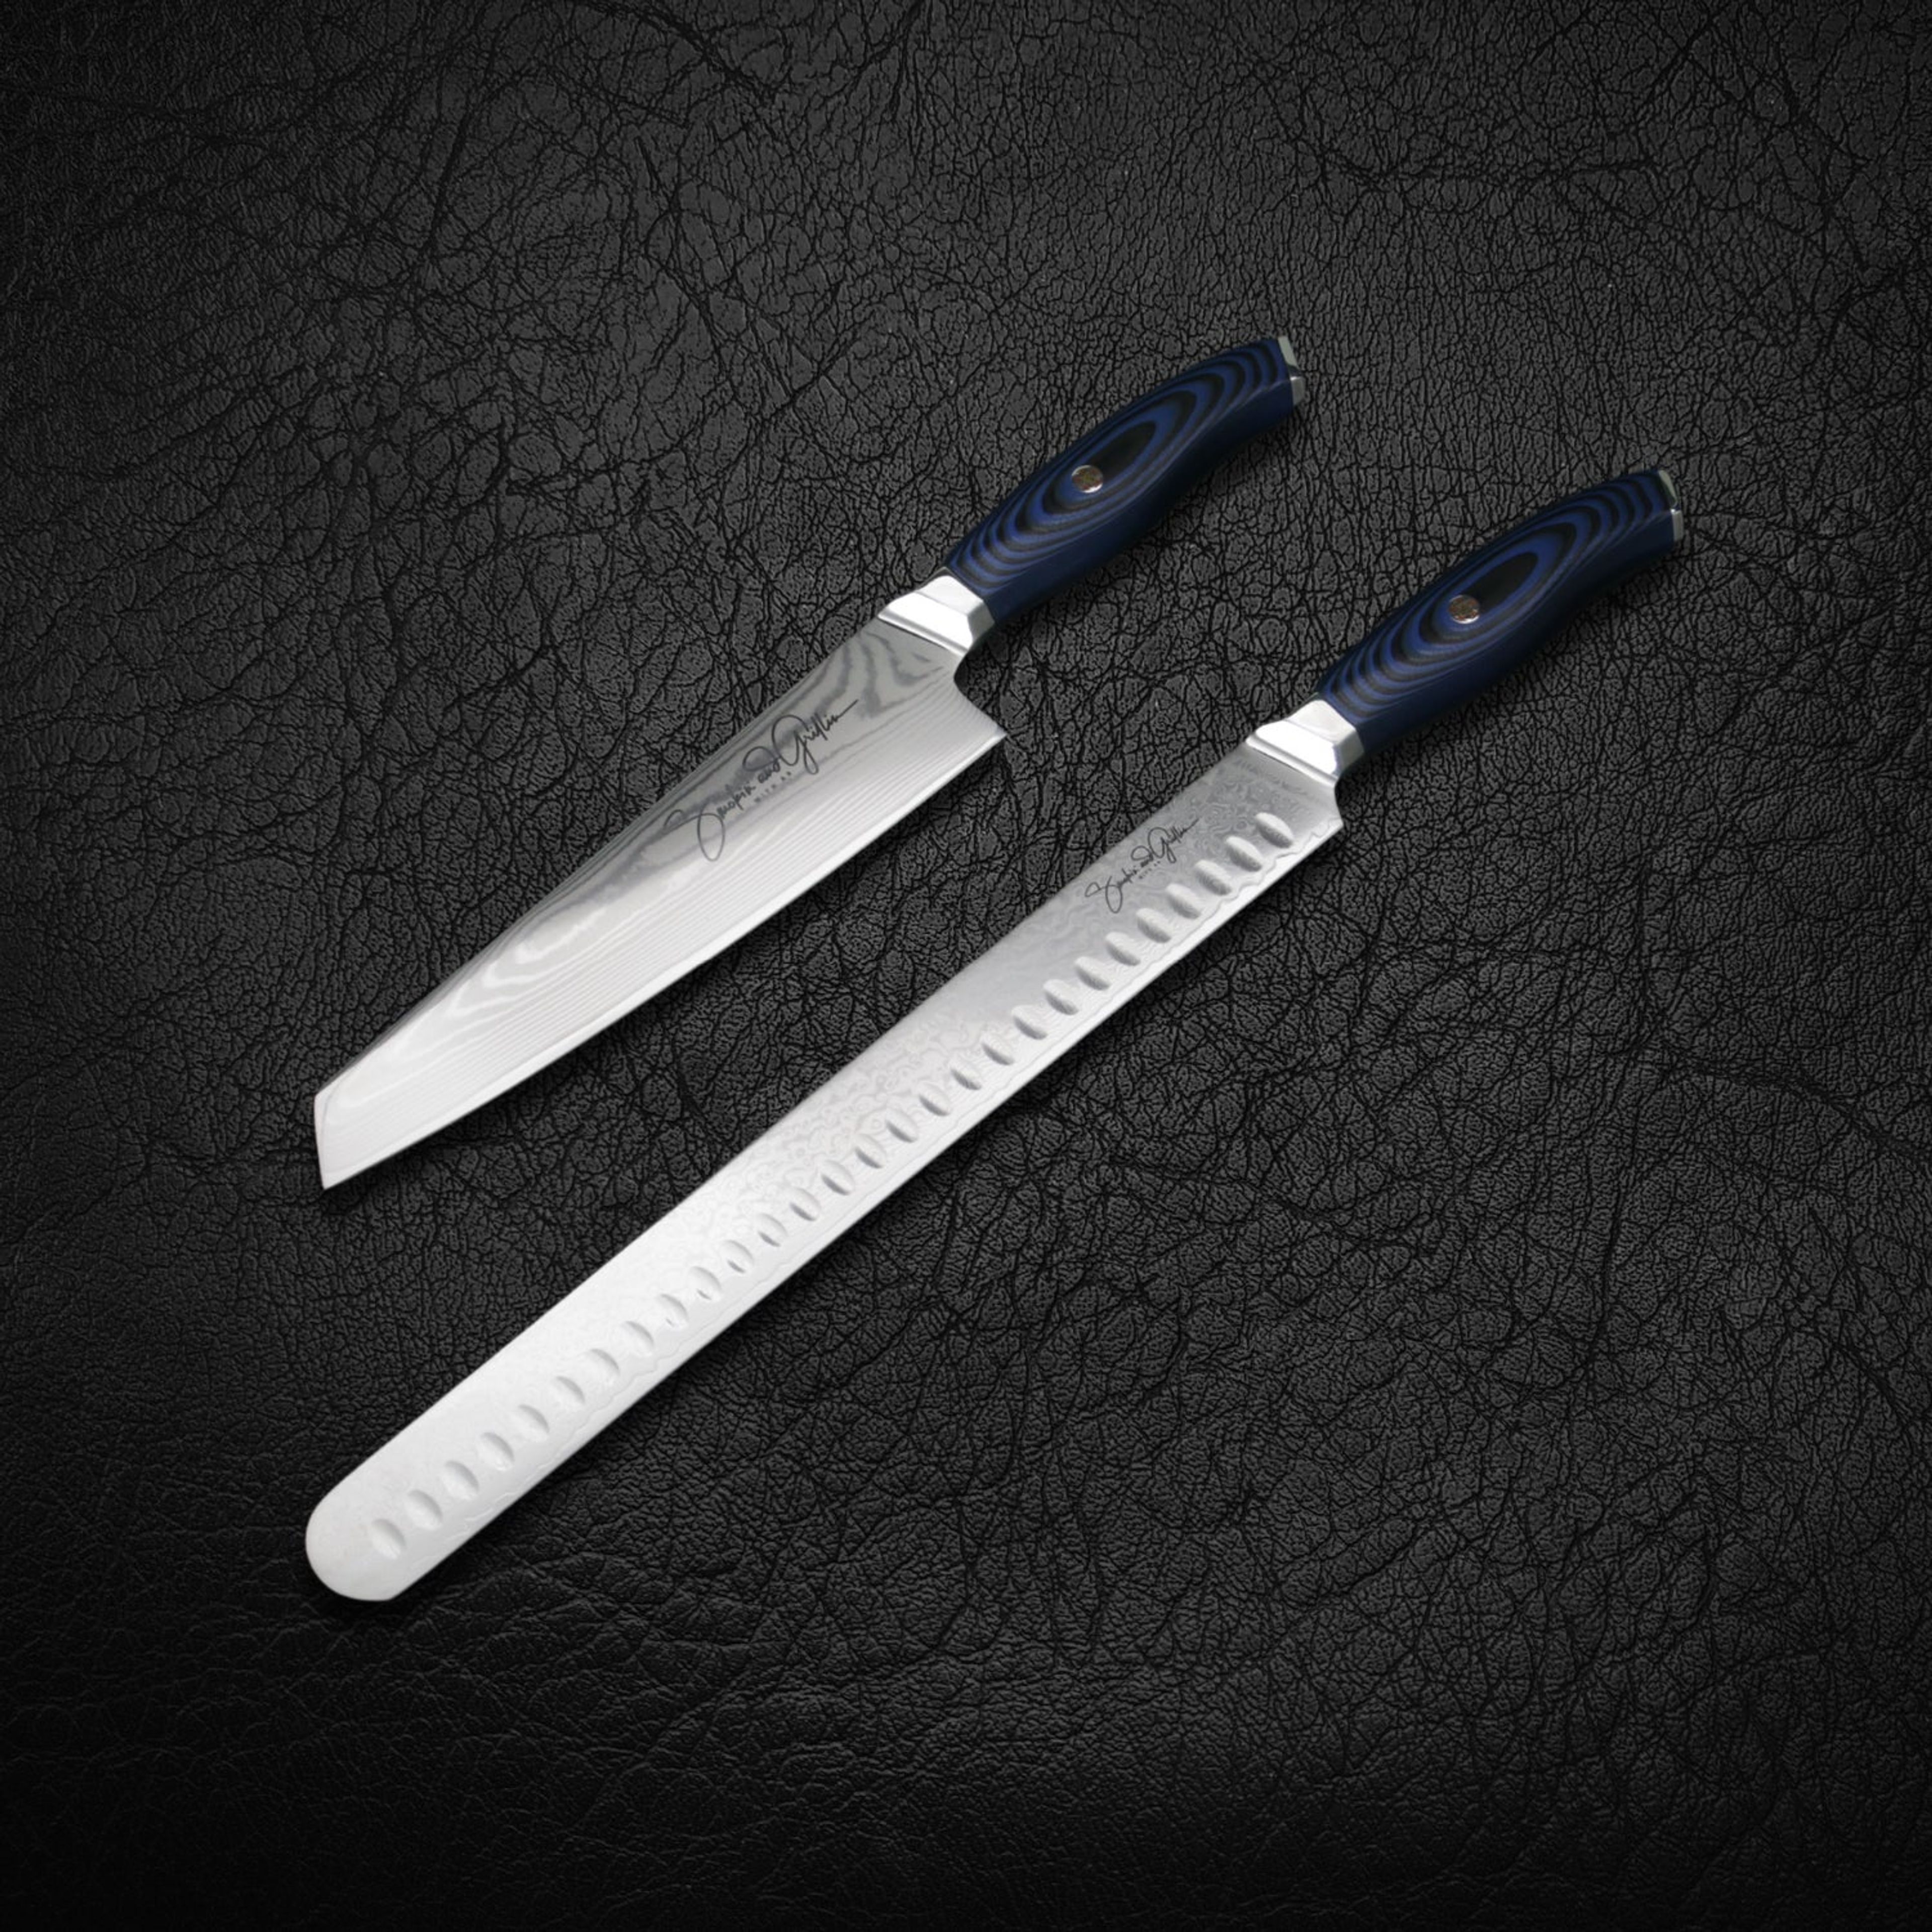 Smokin' and Grillin' with AB Signature Japanese Damascus Steel Knife set of 2